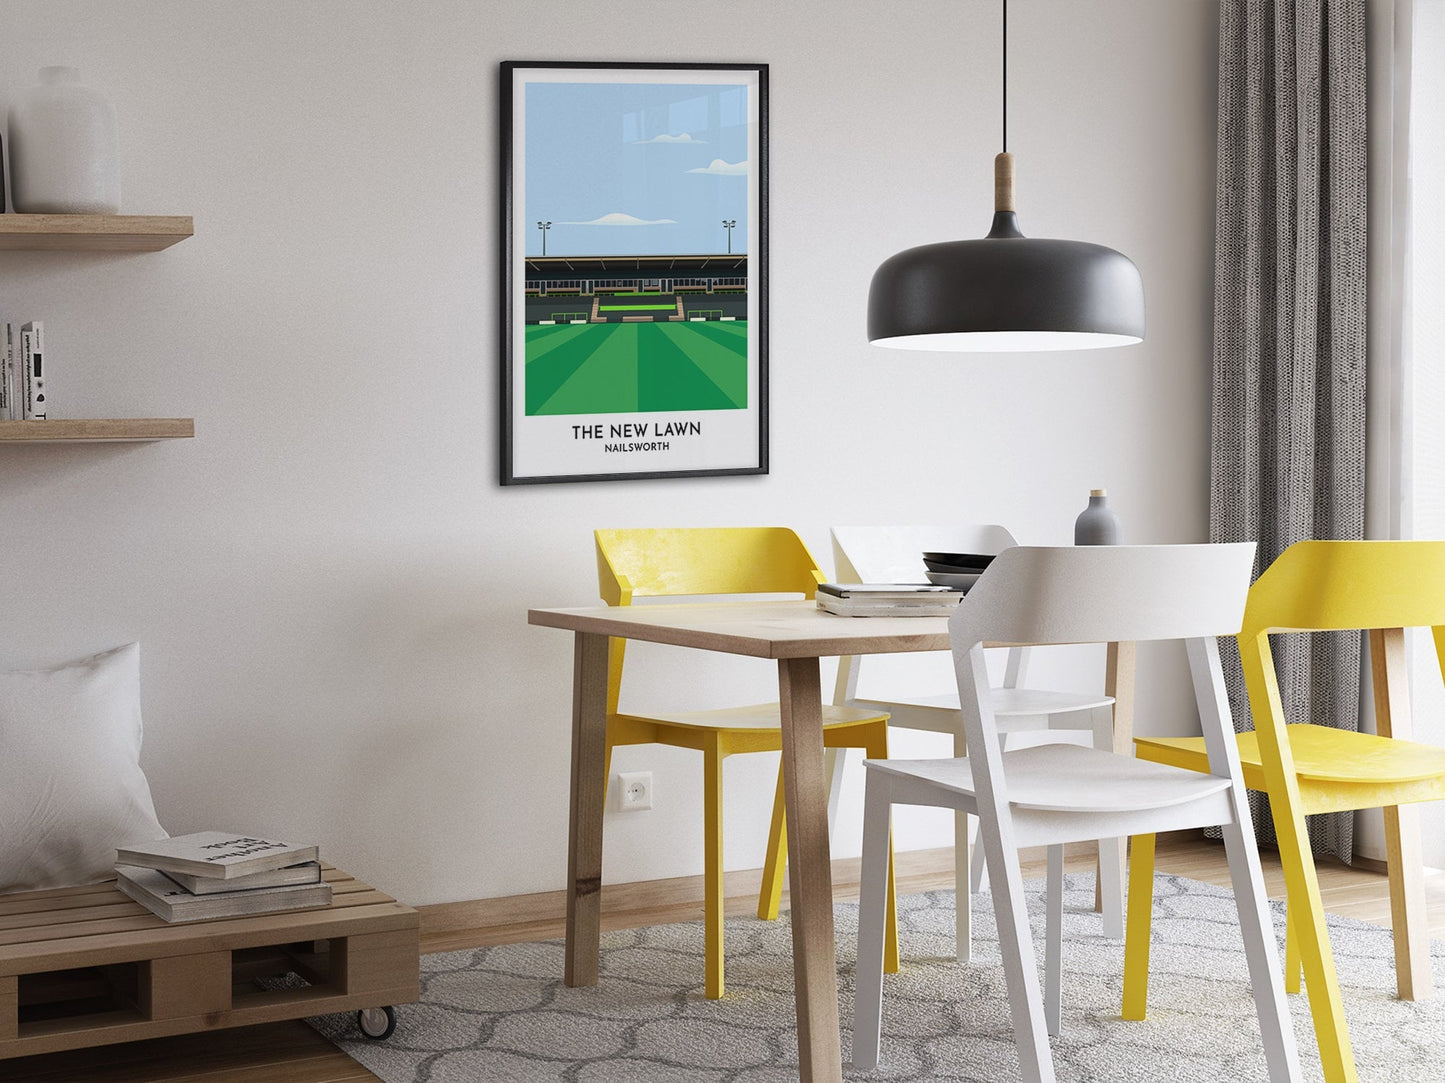 Forest Green Gift Print - The New Lawn Nailsworth Poster - 18th Birthday Gift Boy - Gloucestershire Art Print - Turf Football Art